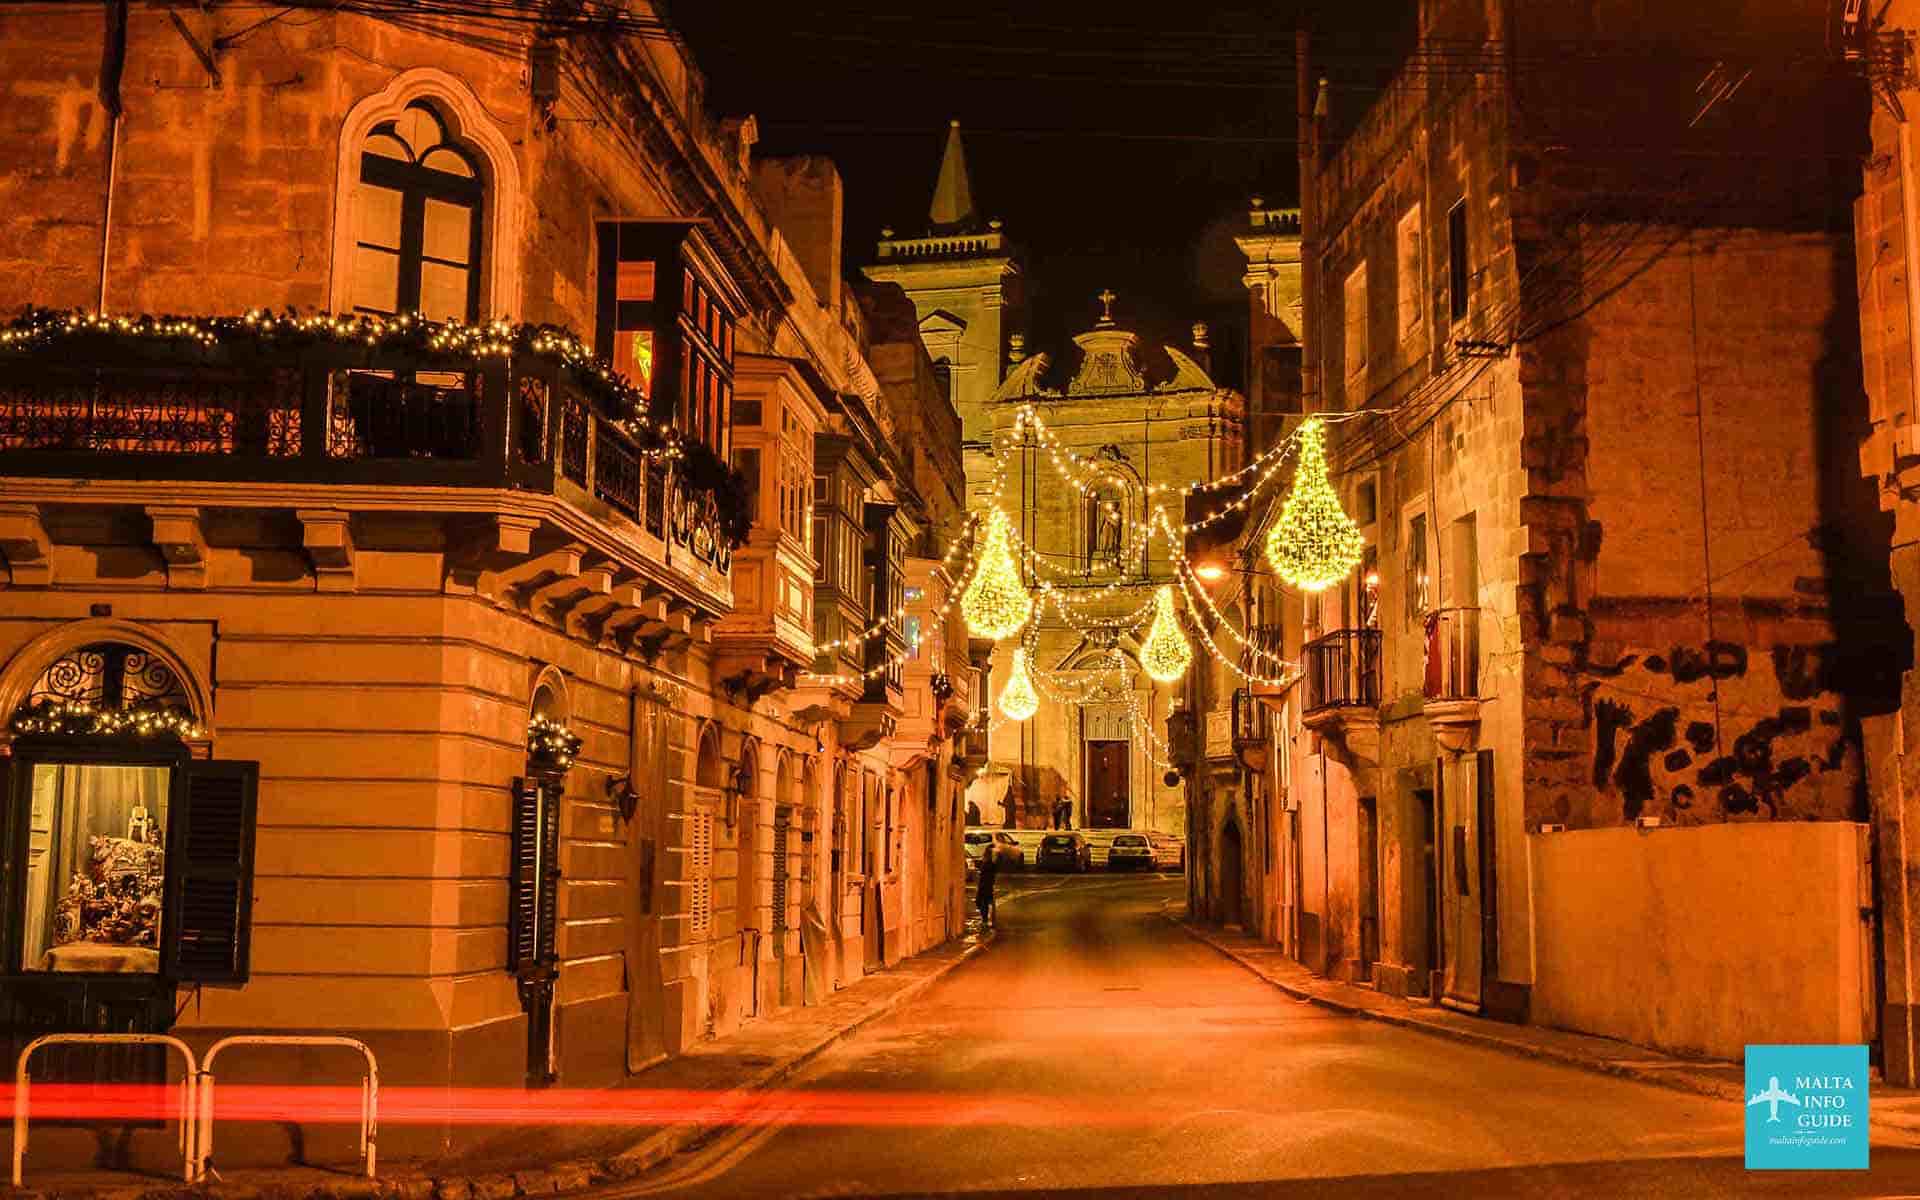 Decorated lights in the streets at Tarxien village.